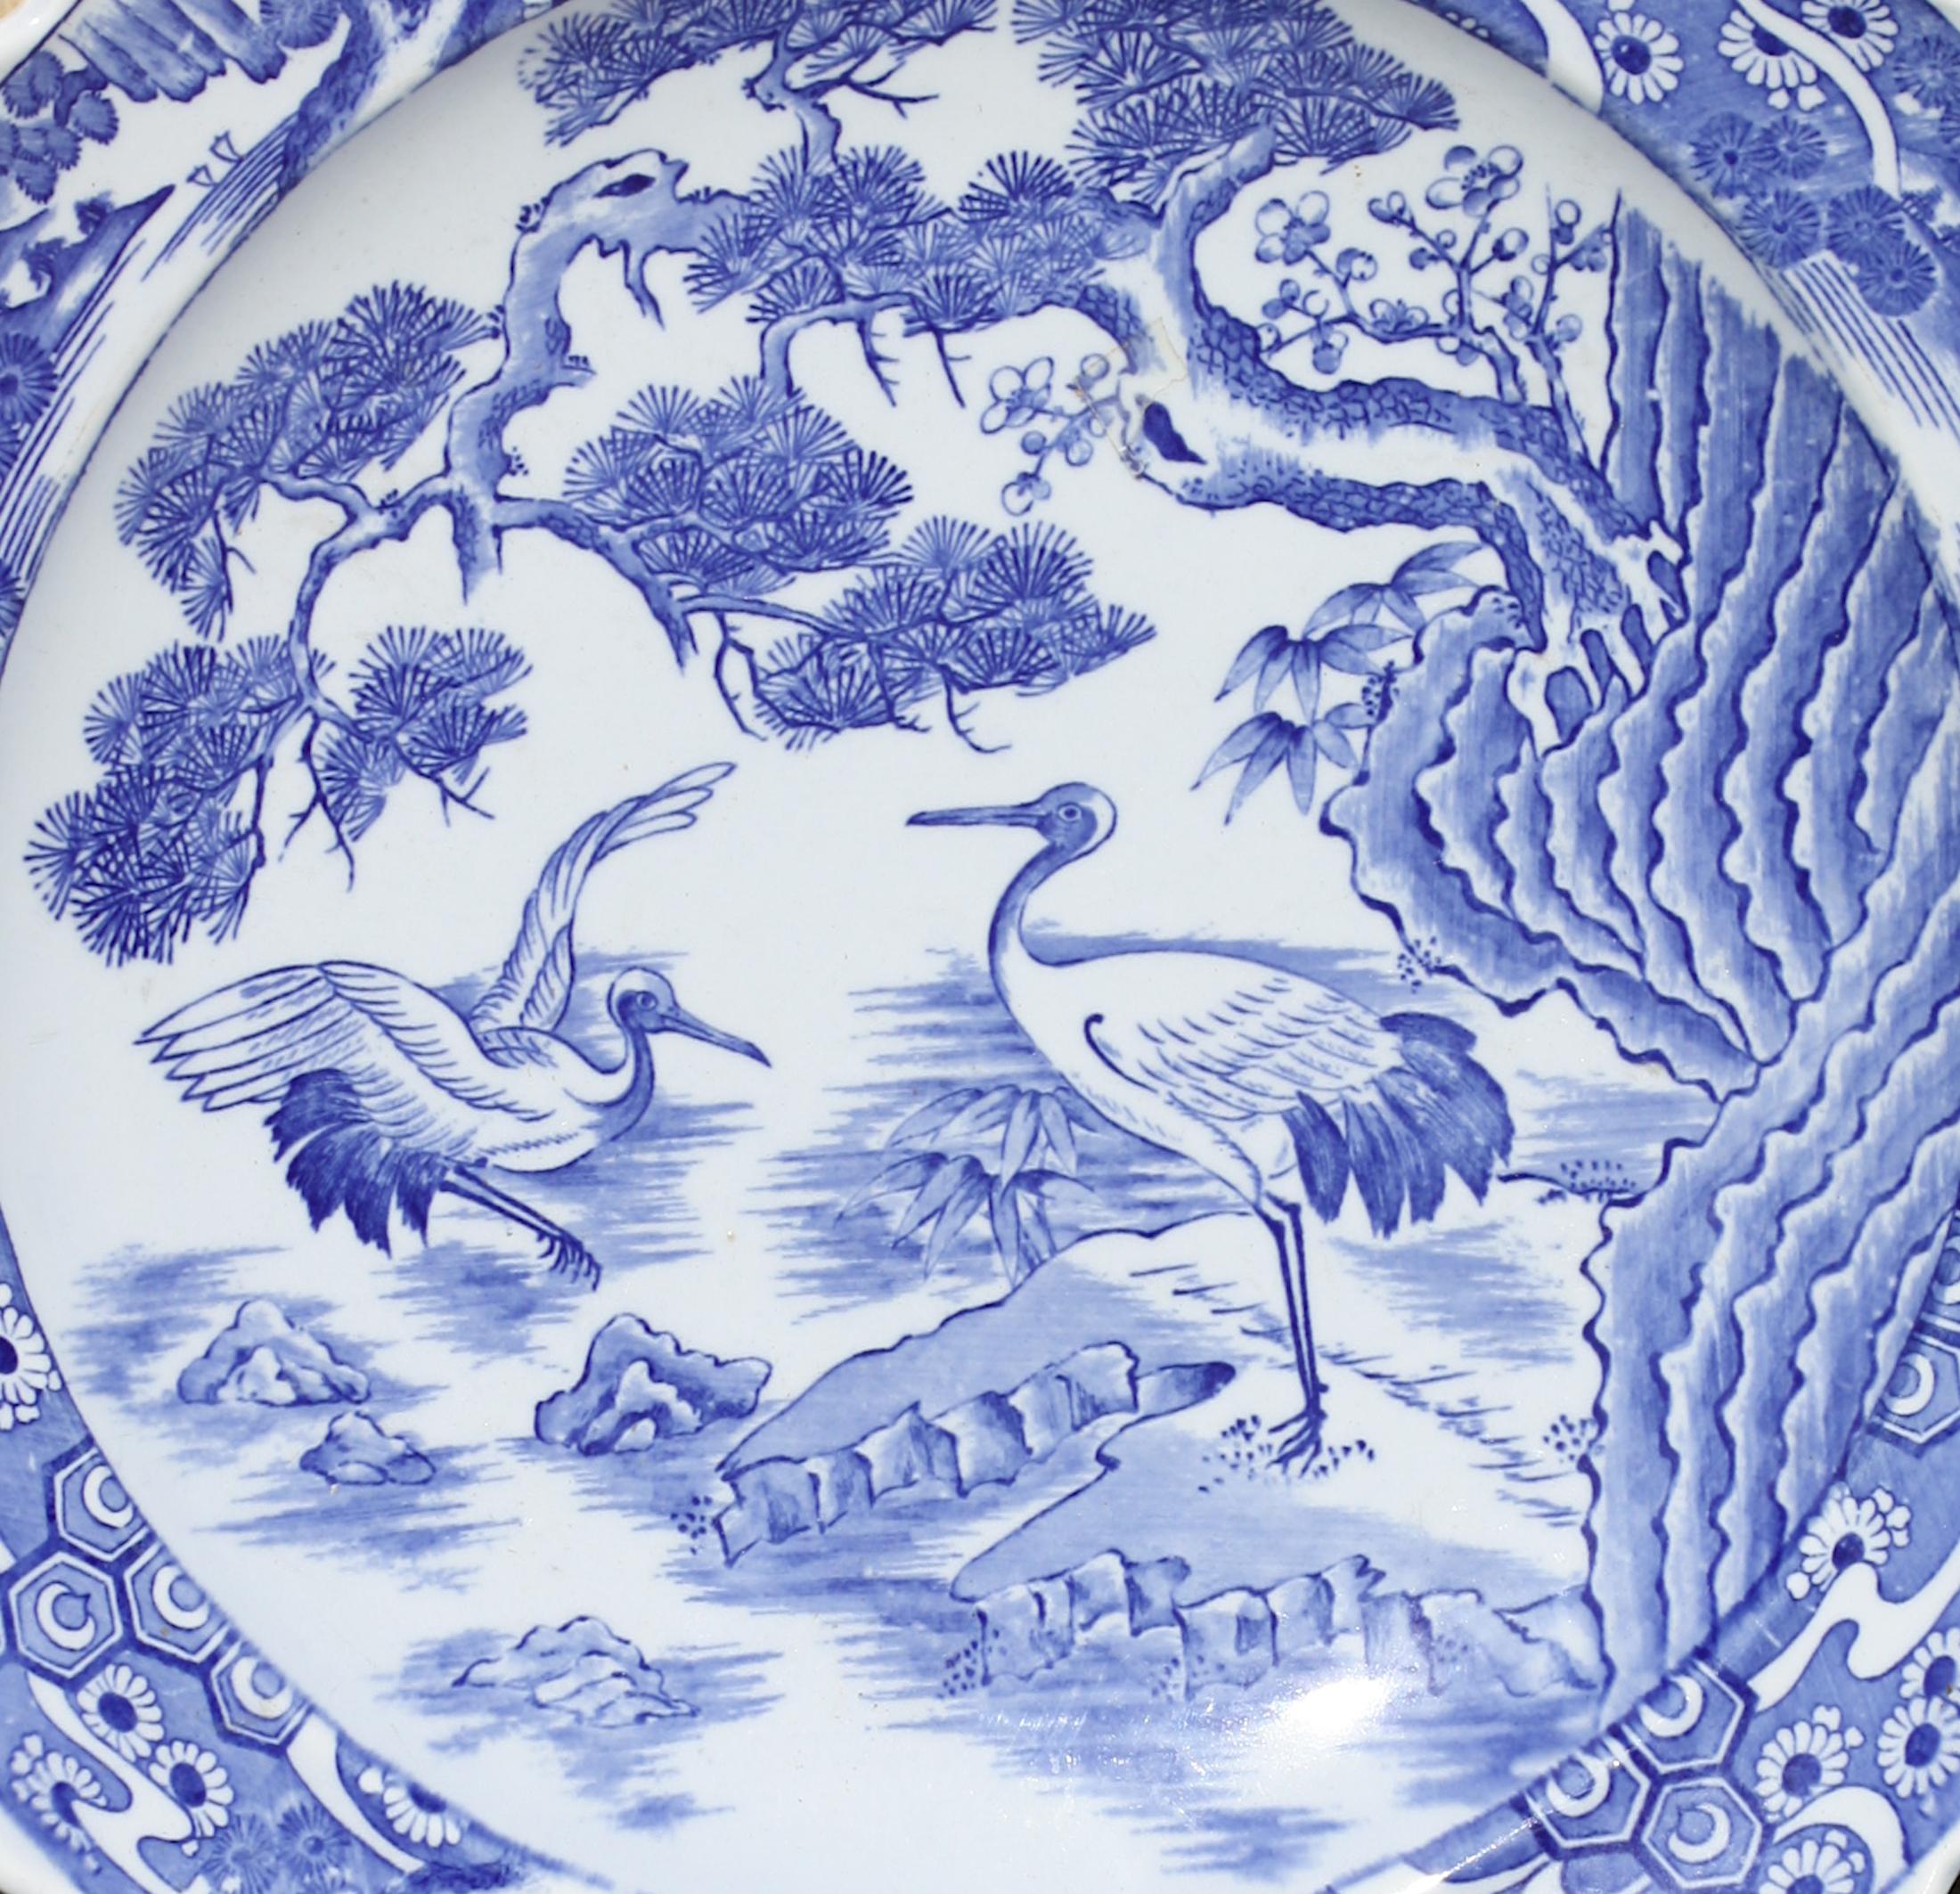 Japanese Blue and White Decorated Porcelain Plate, Meiji Period (1868-1912) For Sale 1